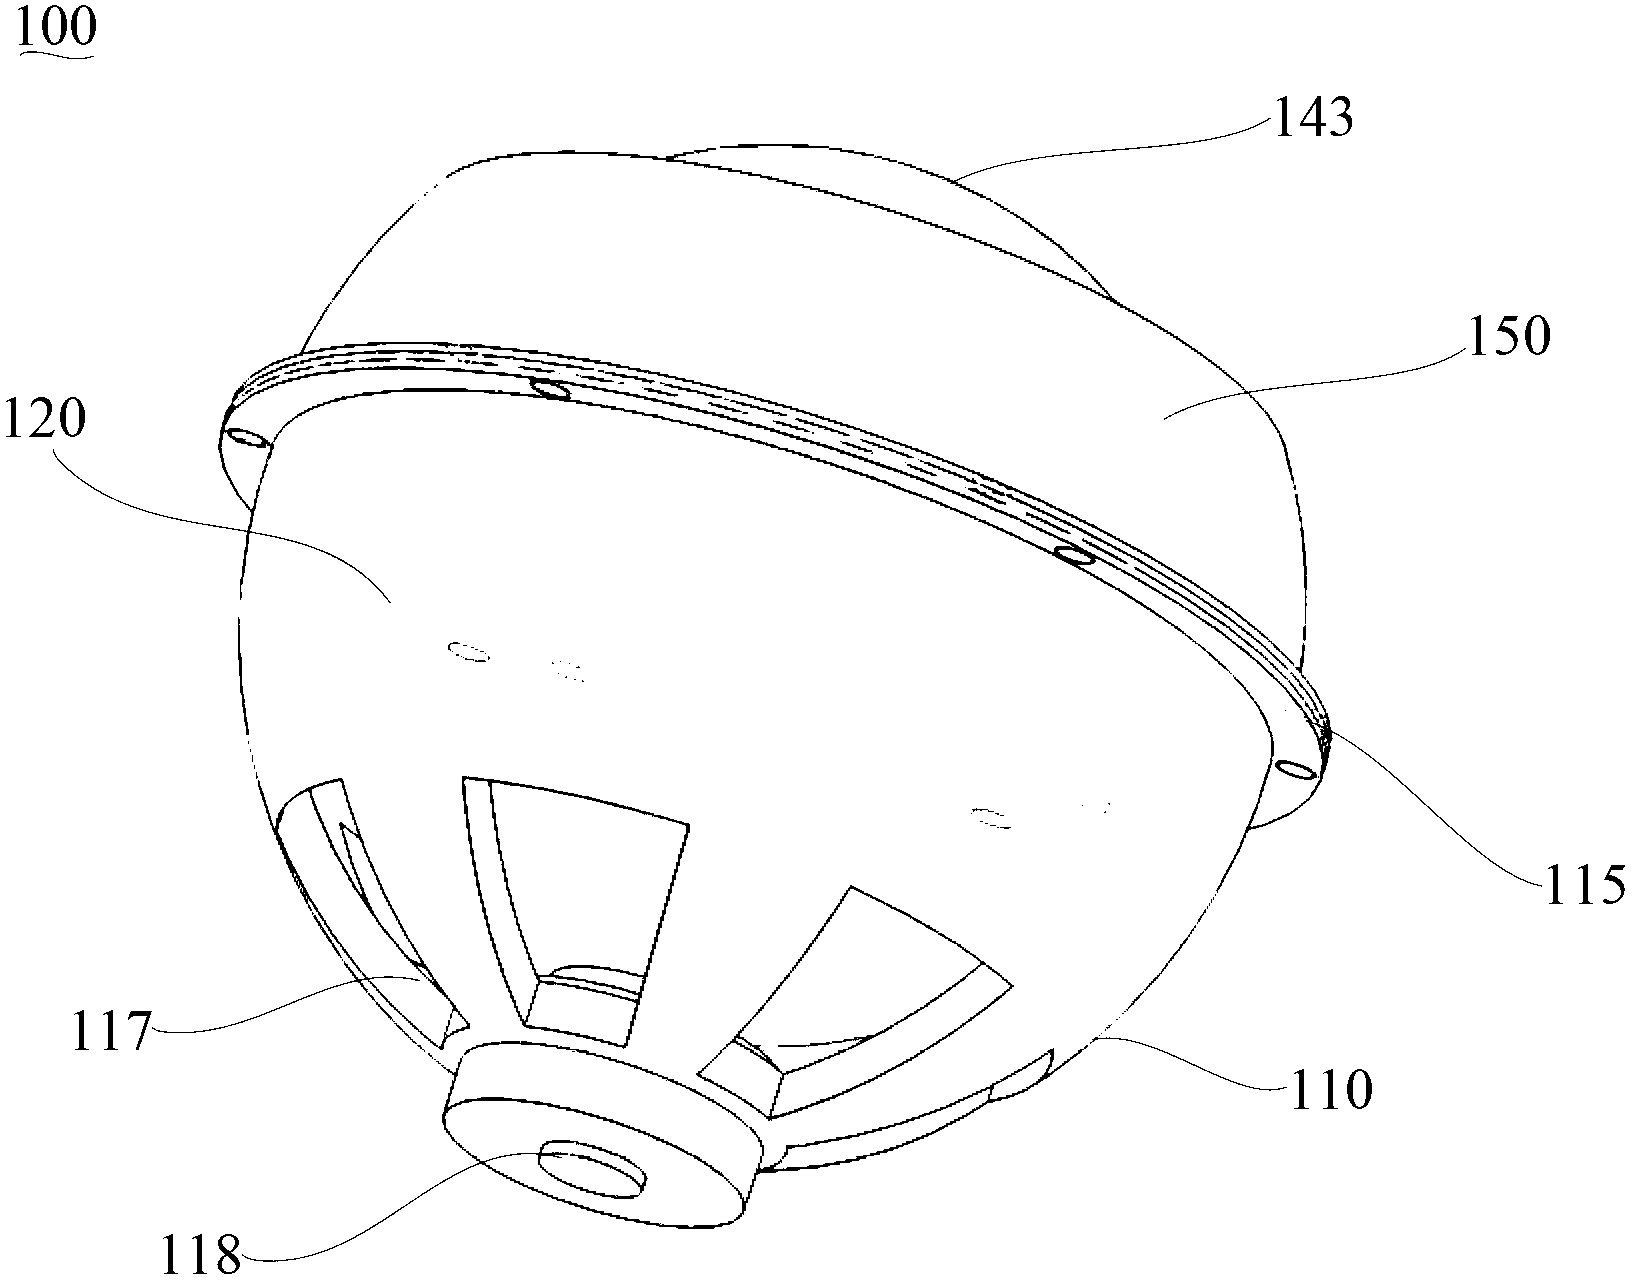 Fruit and vegetable picking device